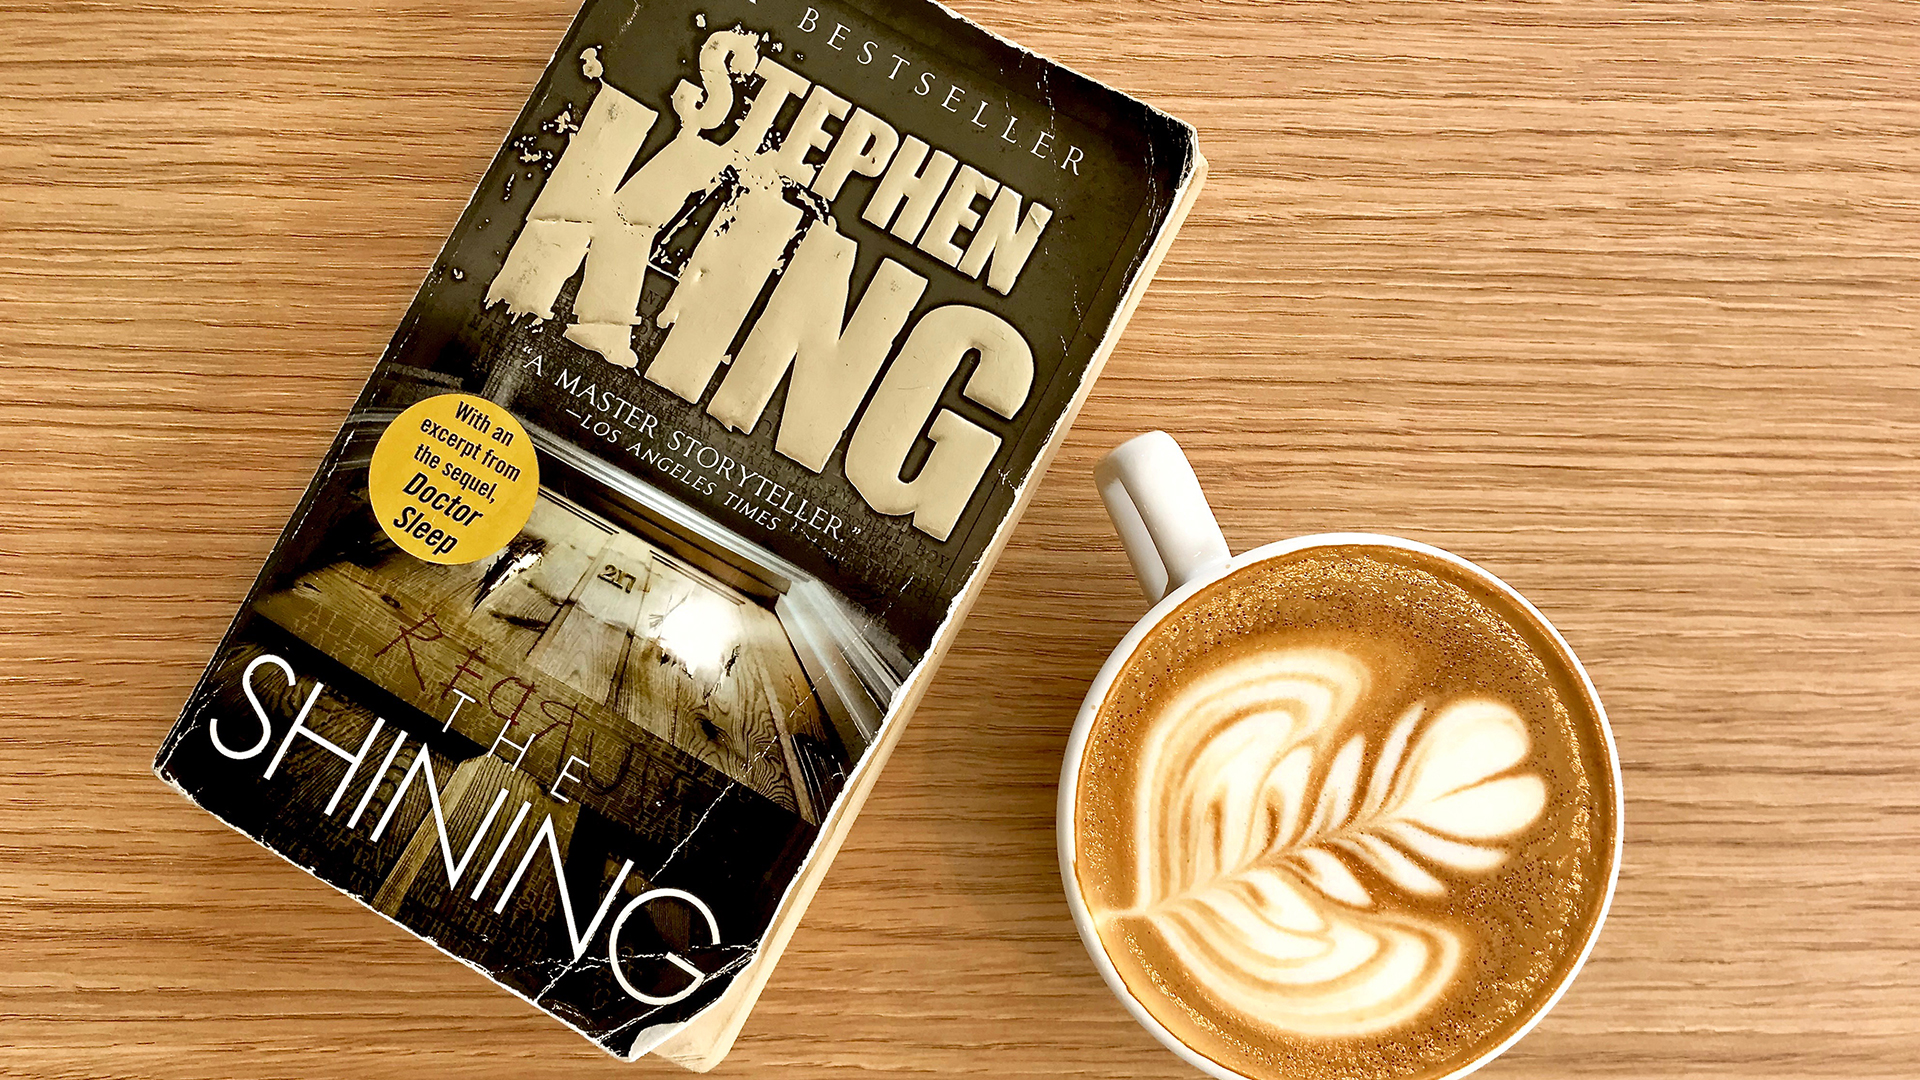 Caffeinated Curation featuring Stephen King's "The Shining" and a cappuccino by Blueprint Coffee at High Low in Grand Center, St. Louis